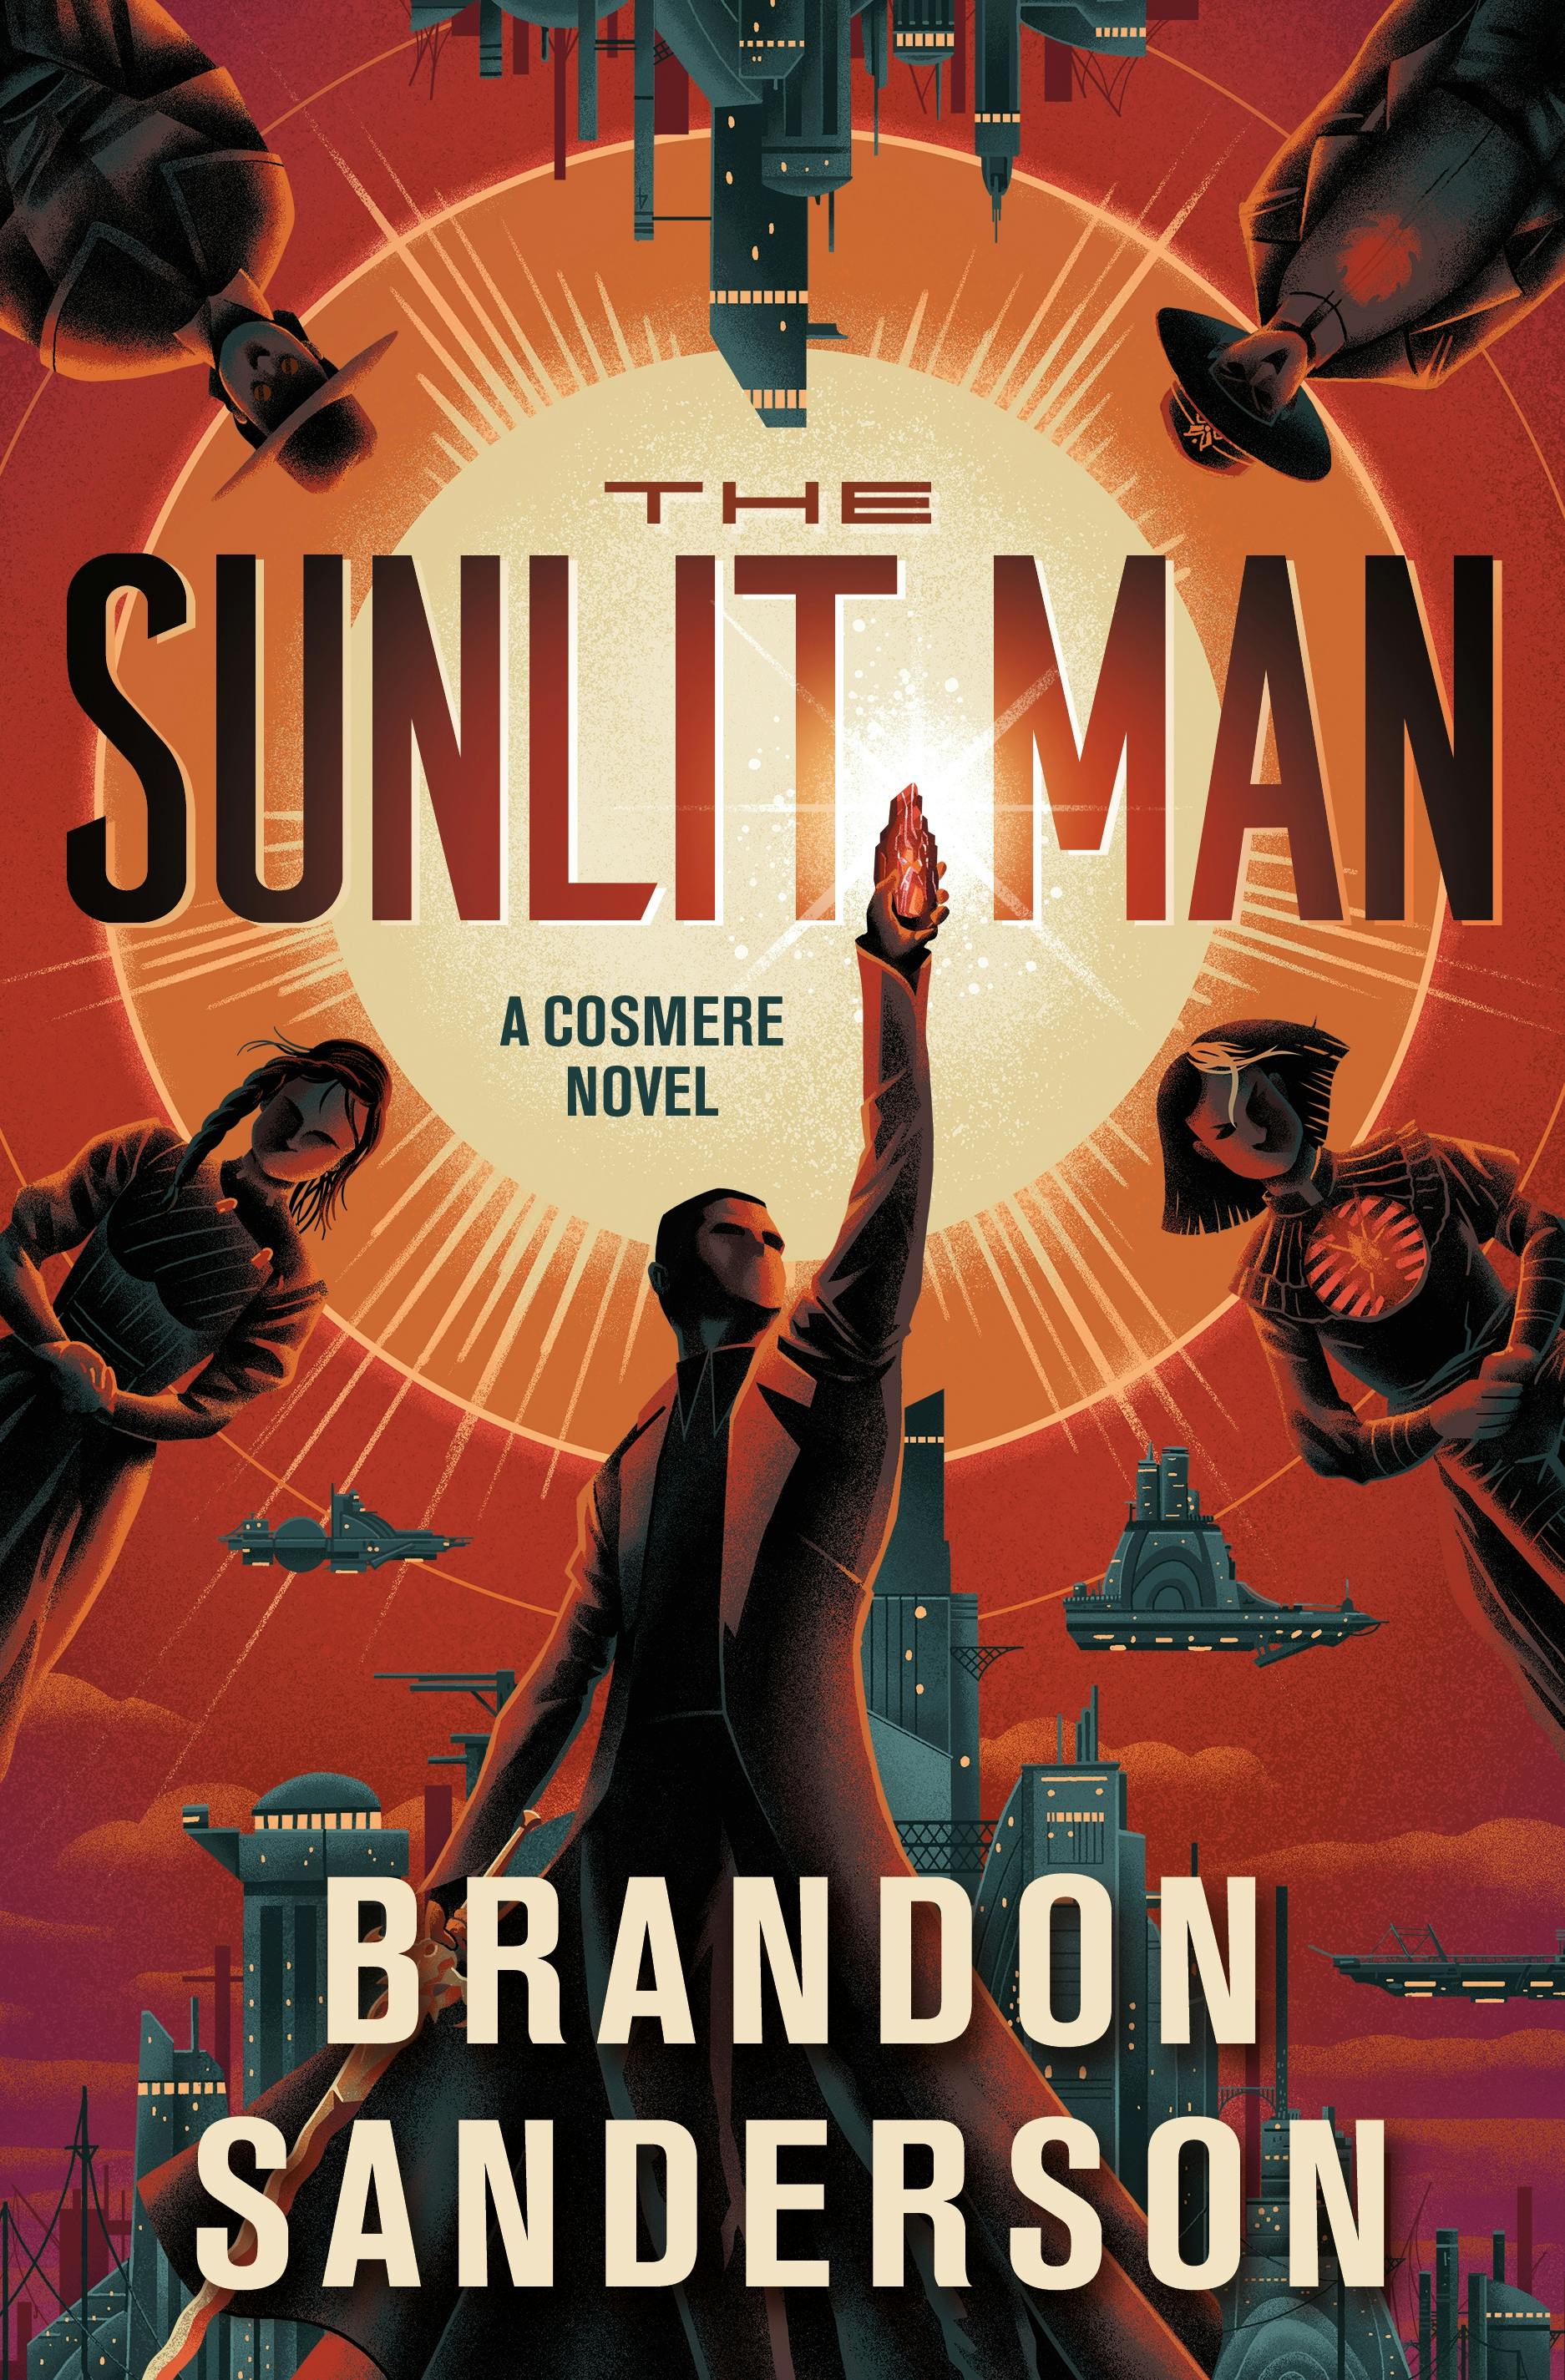 Cover for the book titled as: The Sunlit Man